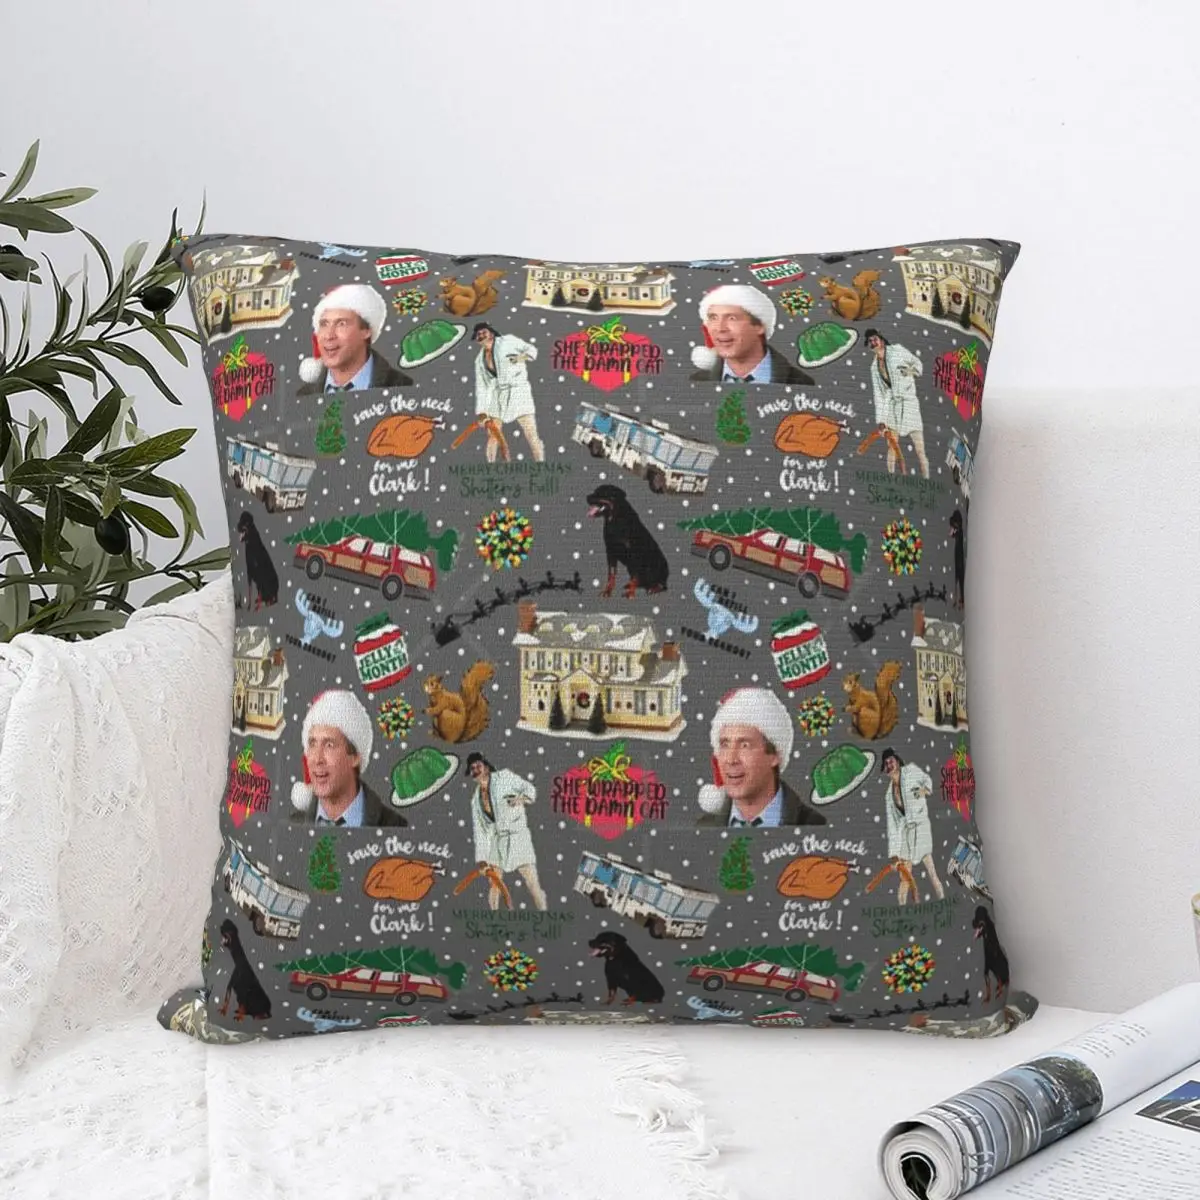 

National Lampoons Square Pillowcase Printed Zip Decor Throw Pillow Case Home Cushion Cover